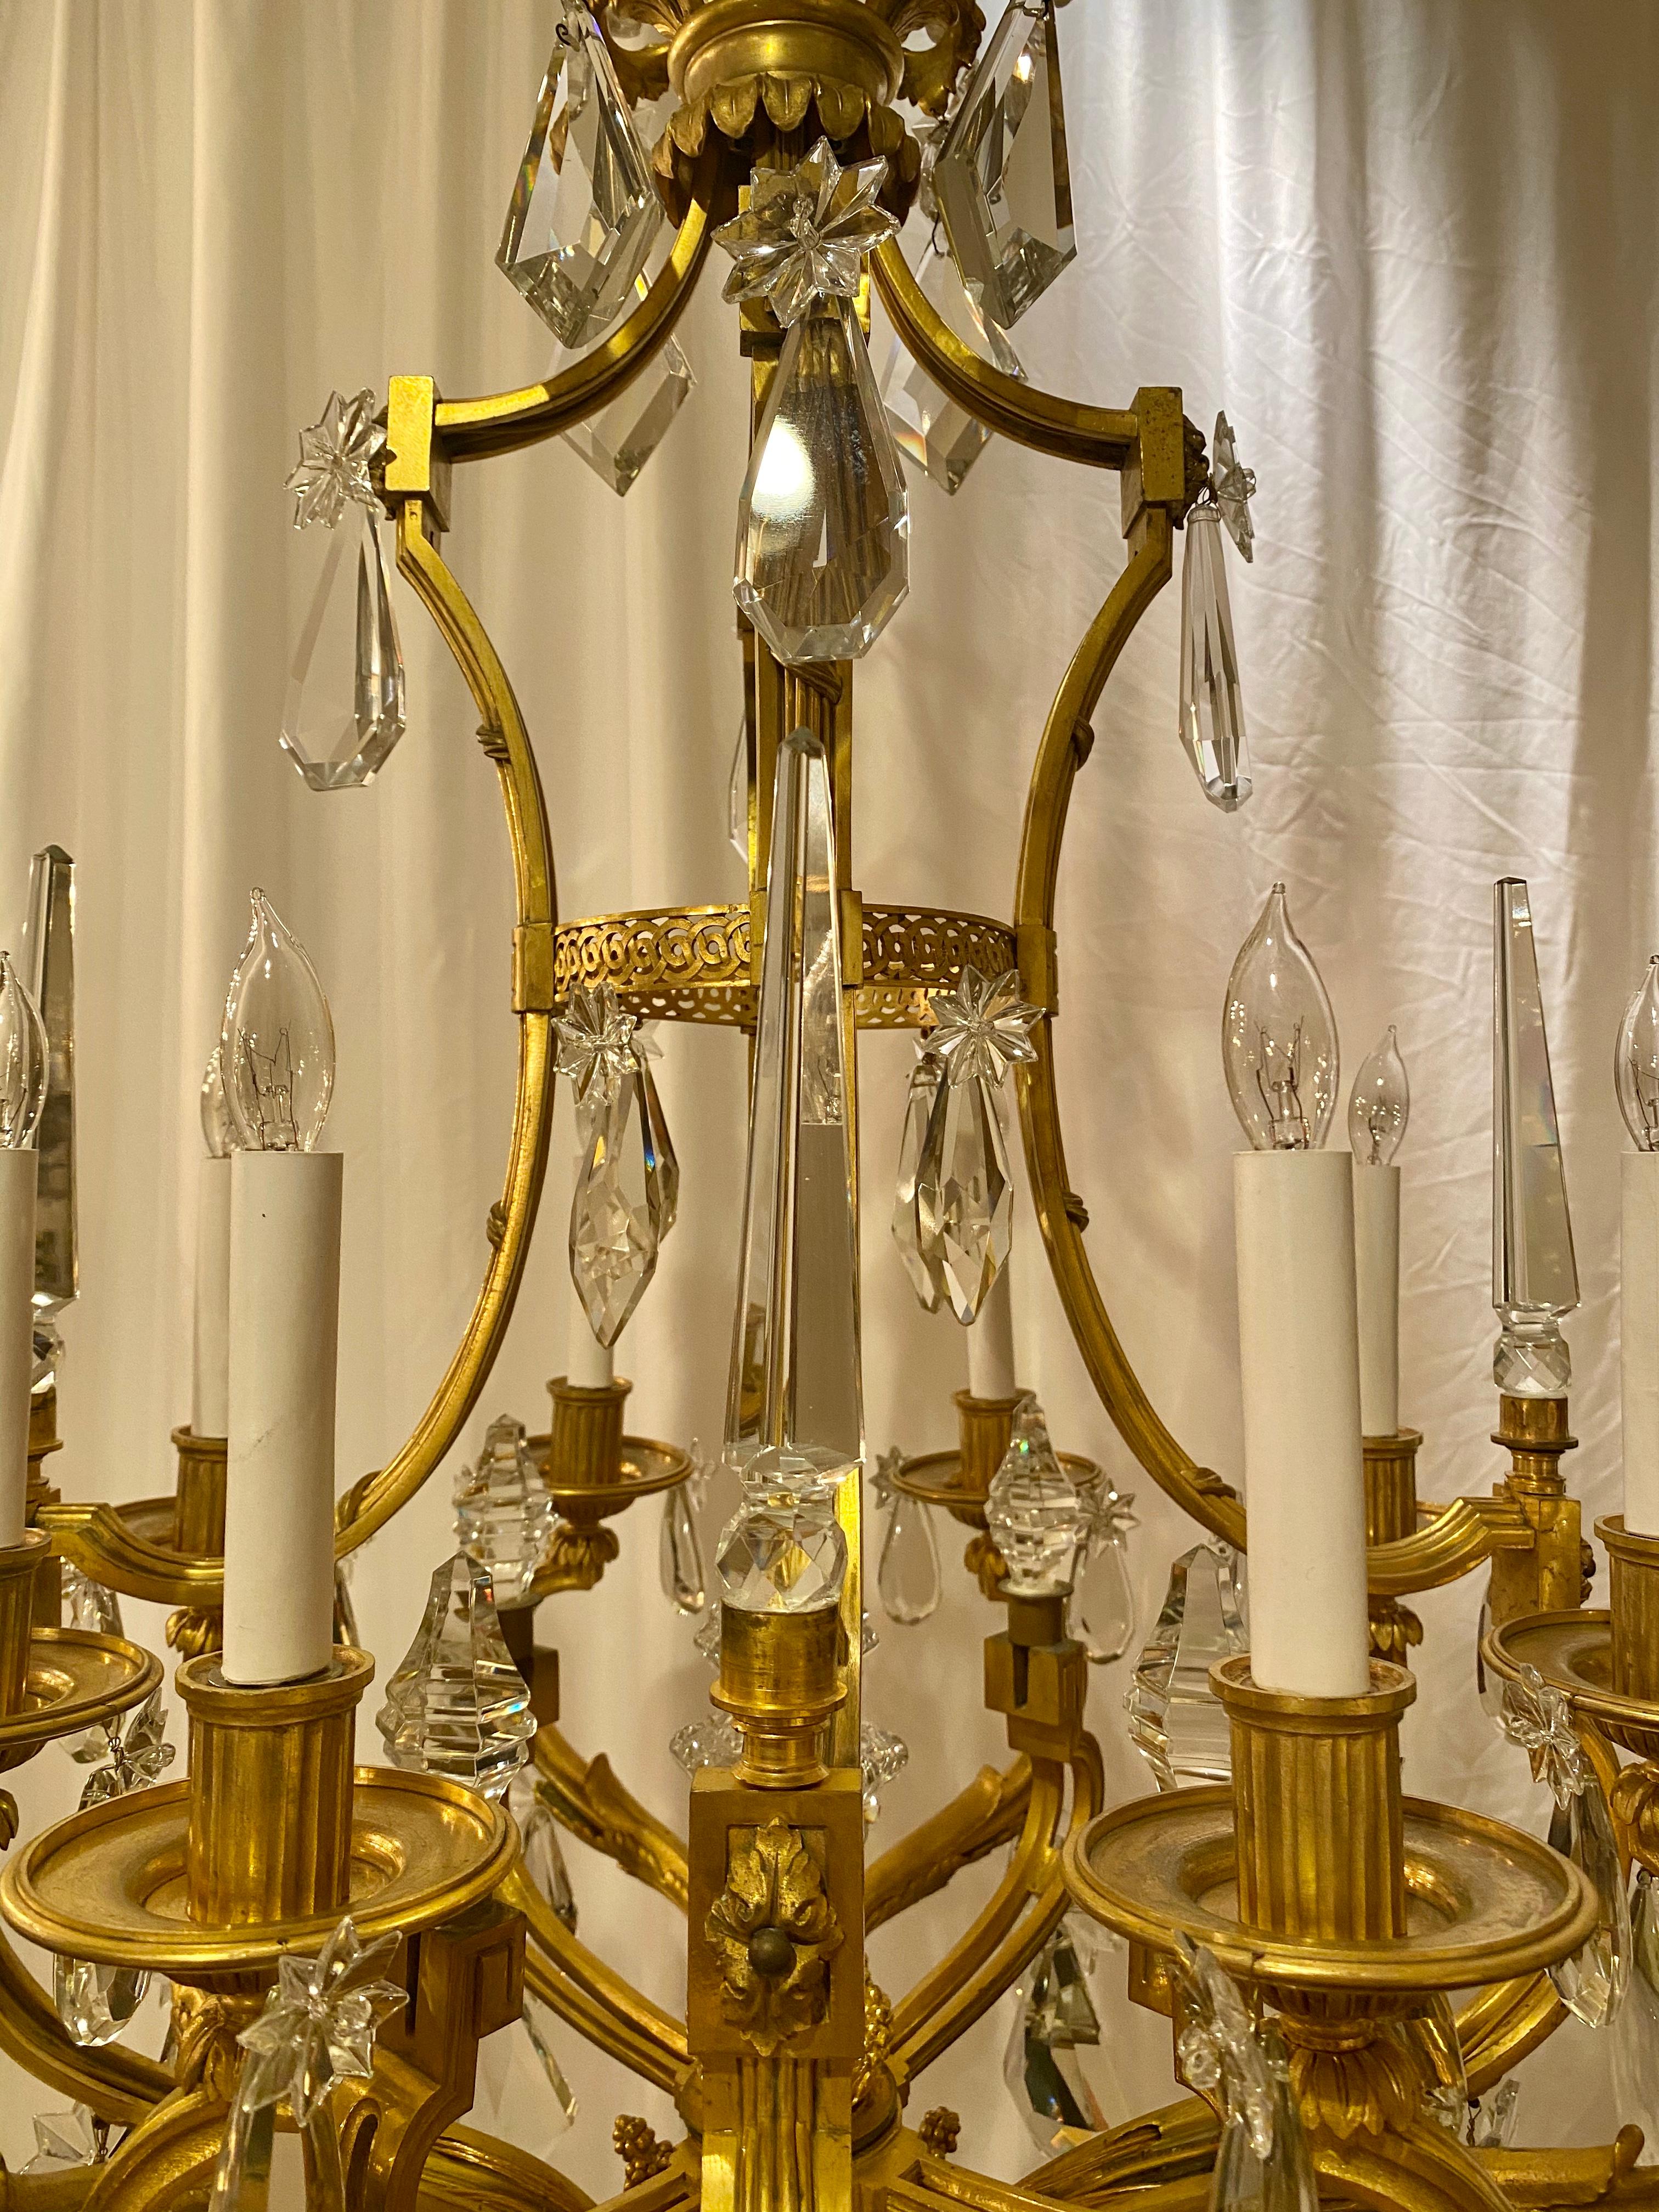 Antique French Ormolu Bronze and Cut Crystal Chandelier, Circa 1860-1870.
We love this chandelier with its fine ormolu and handsome appearance. Of medium size, it would work well in a variety of settings.